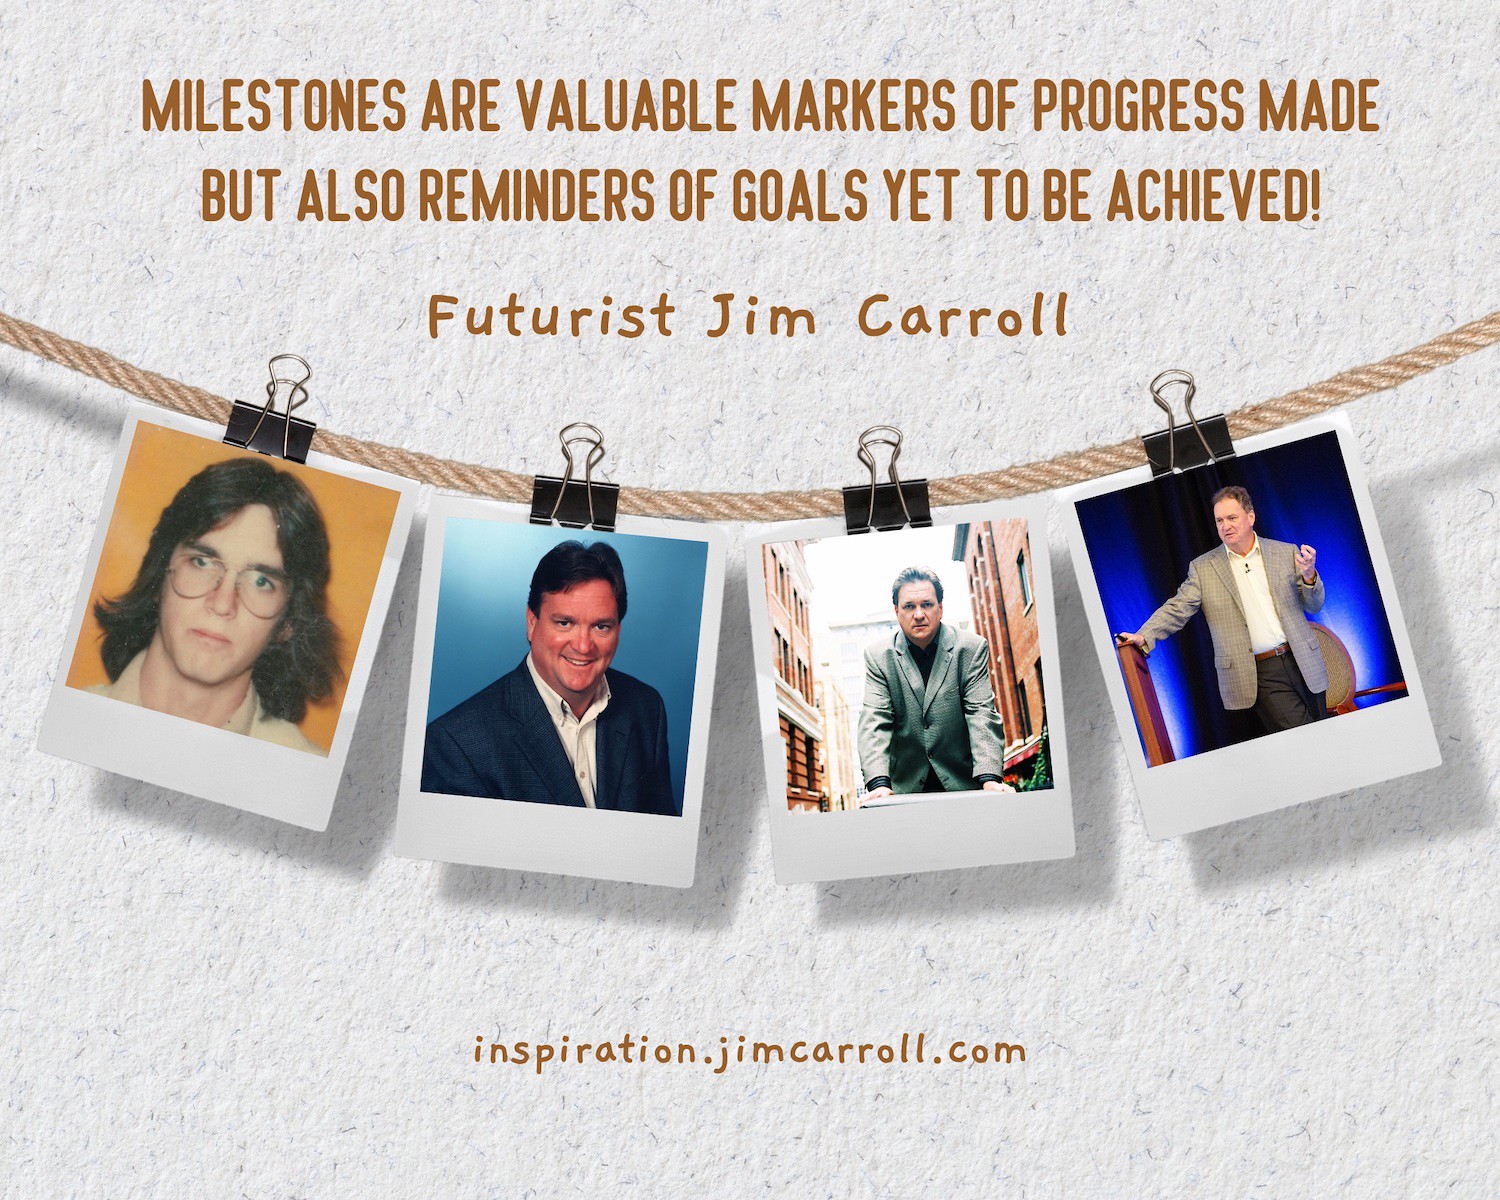 "Milestones are valuable markers of progress made but also reminders of goals yet to be achieved!" - Futurist Jim Carroll